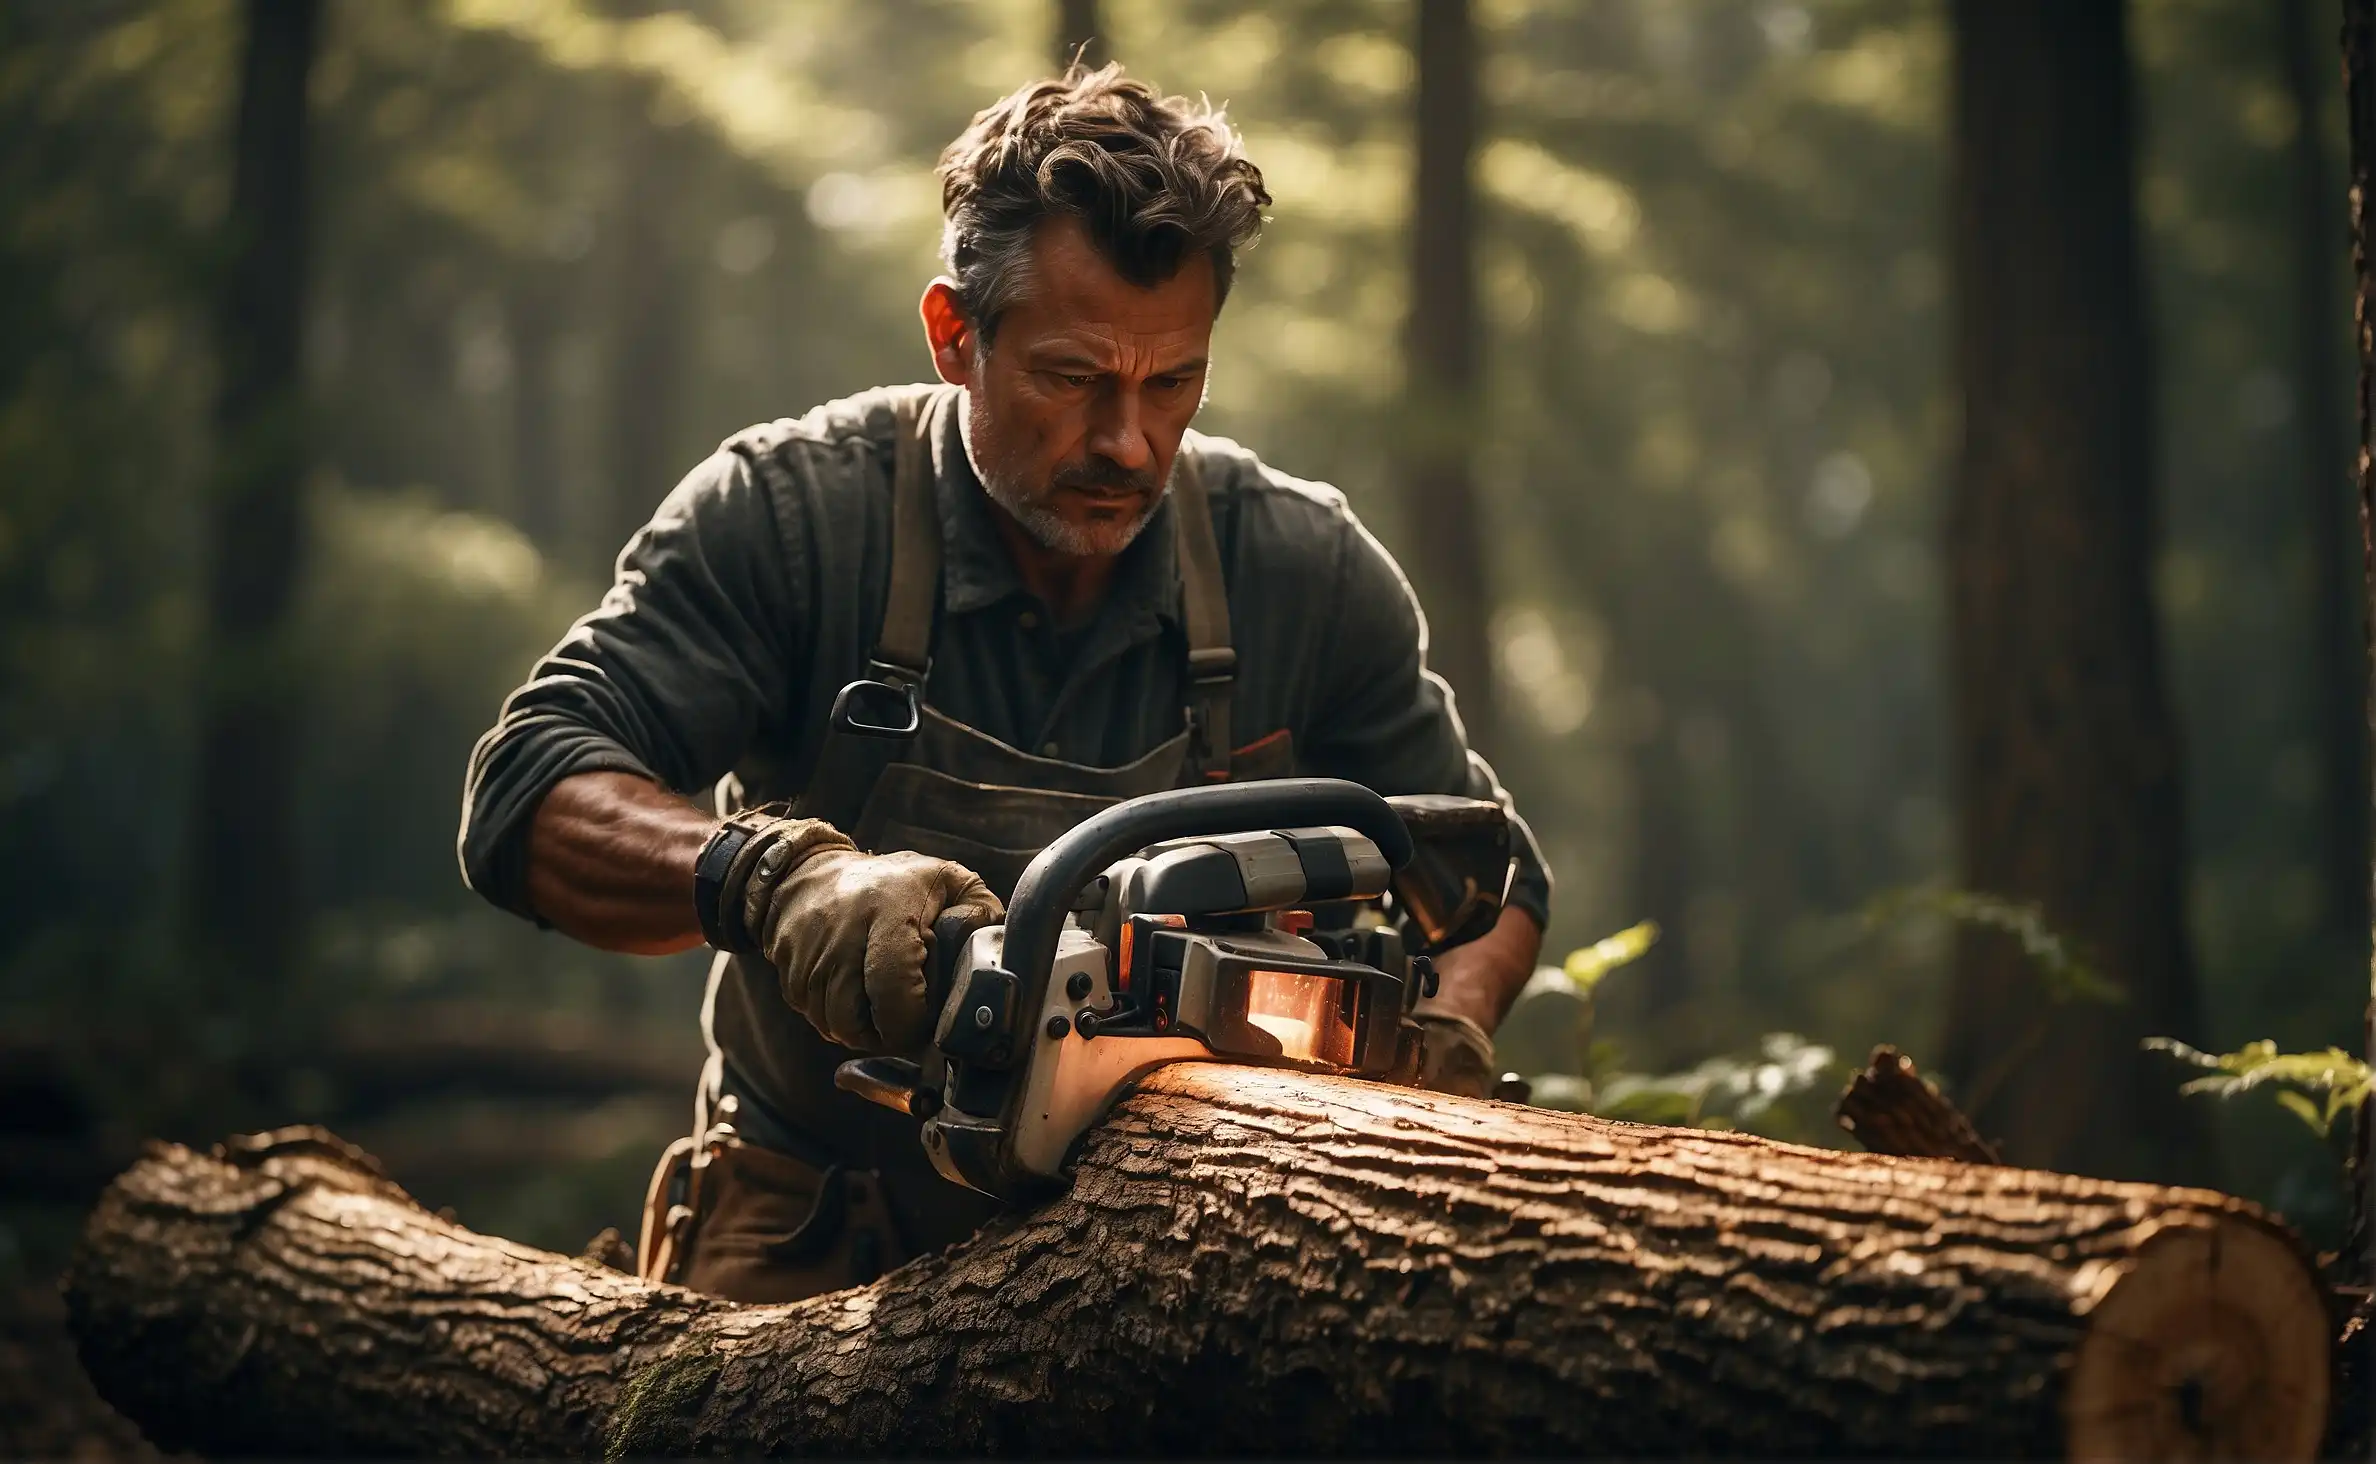 Hold Logs While Cutting With Chainsaw